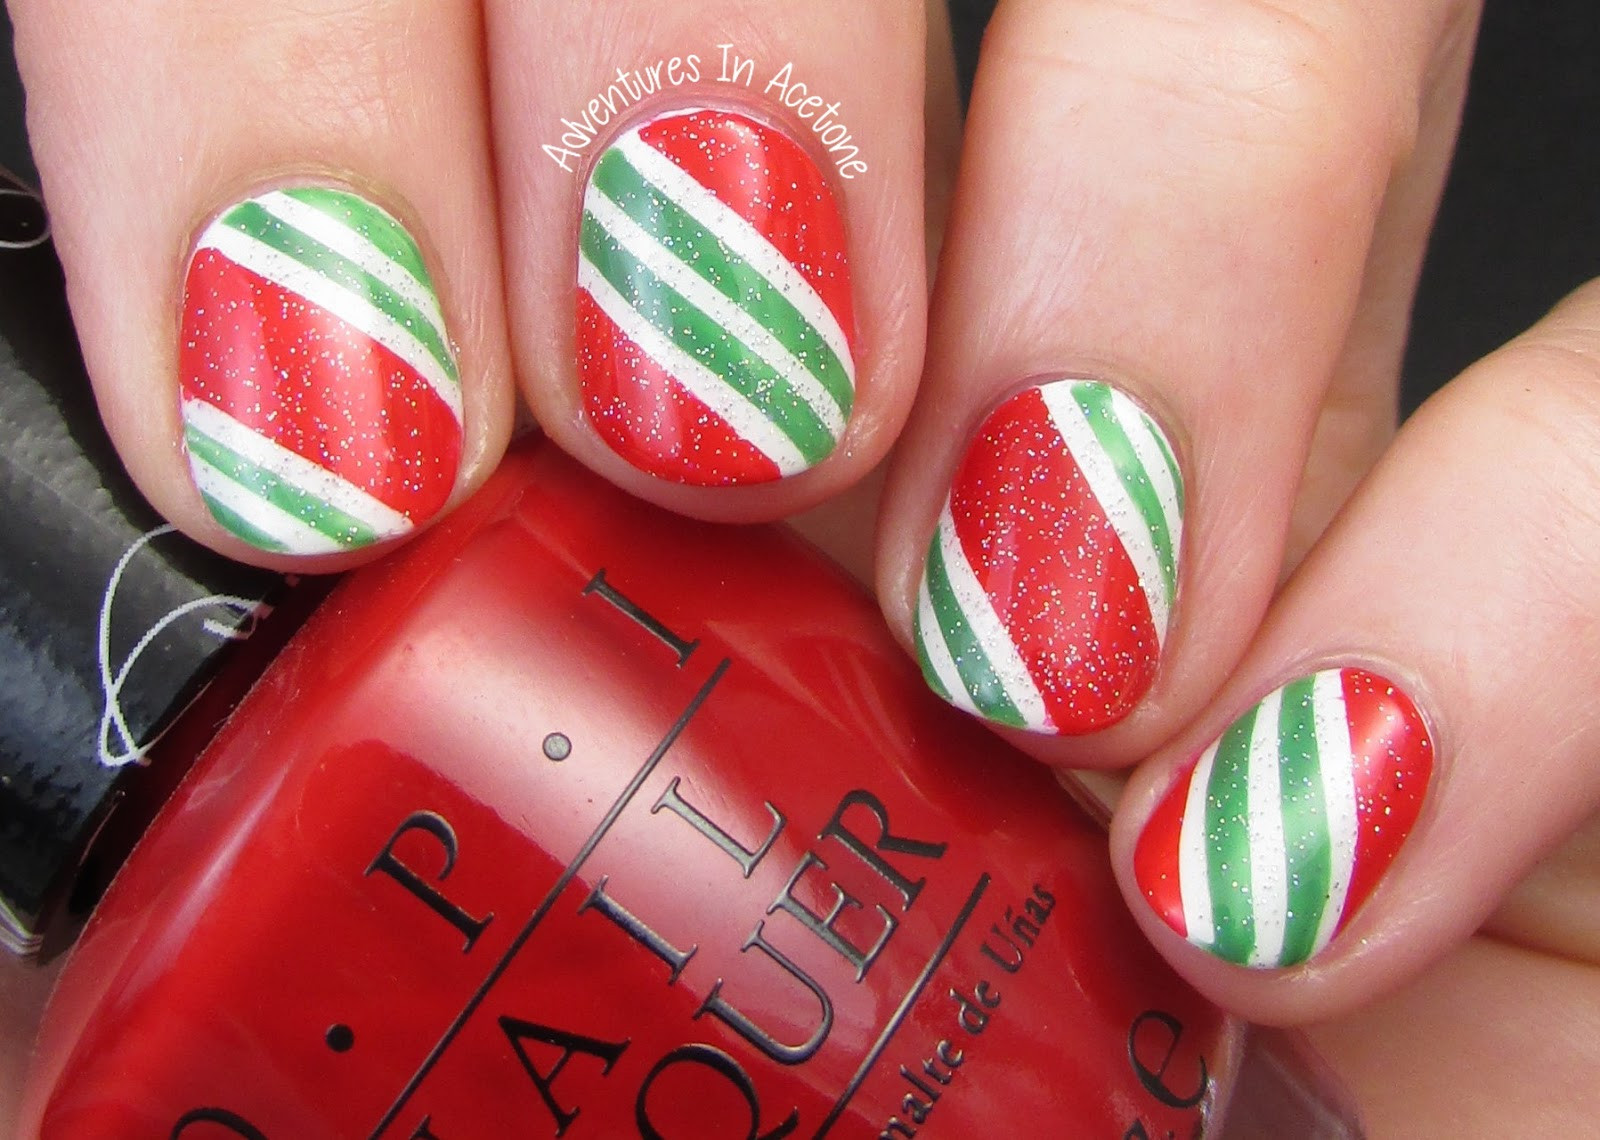 Candy Cane Nail Art
 Candy Cane Nail Art Adventures In Acetone